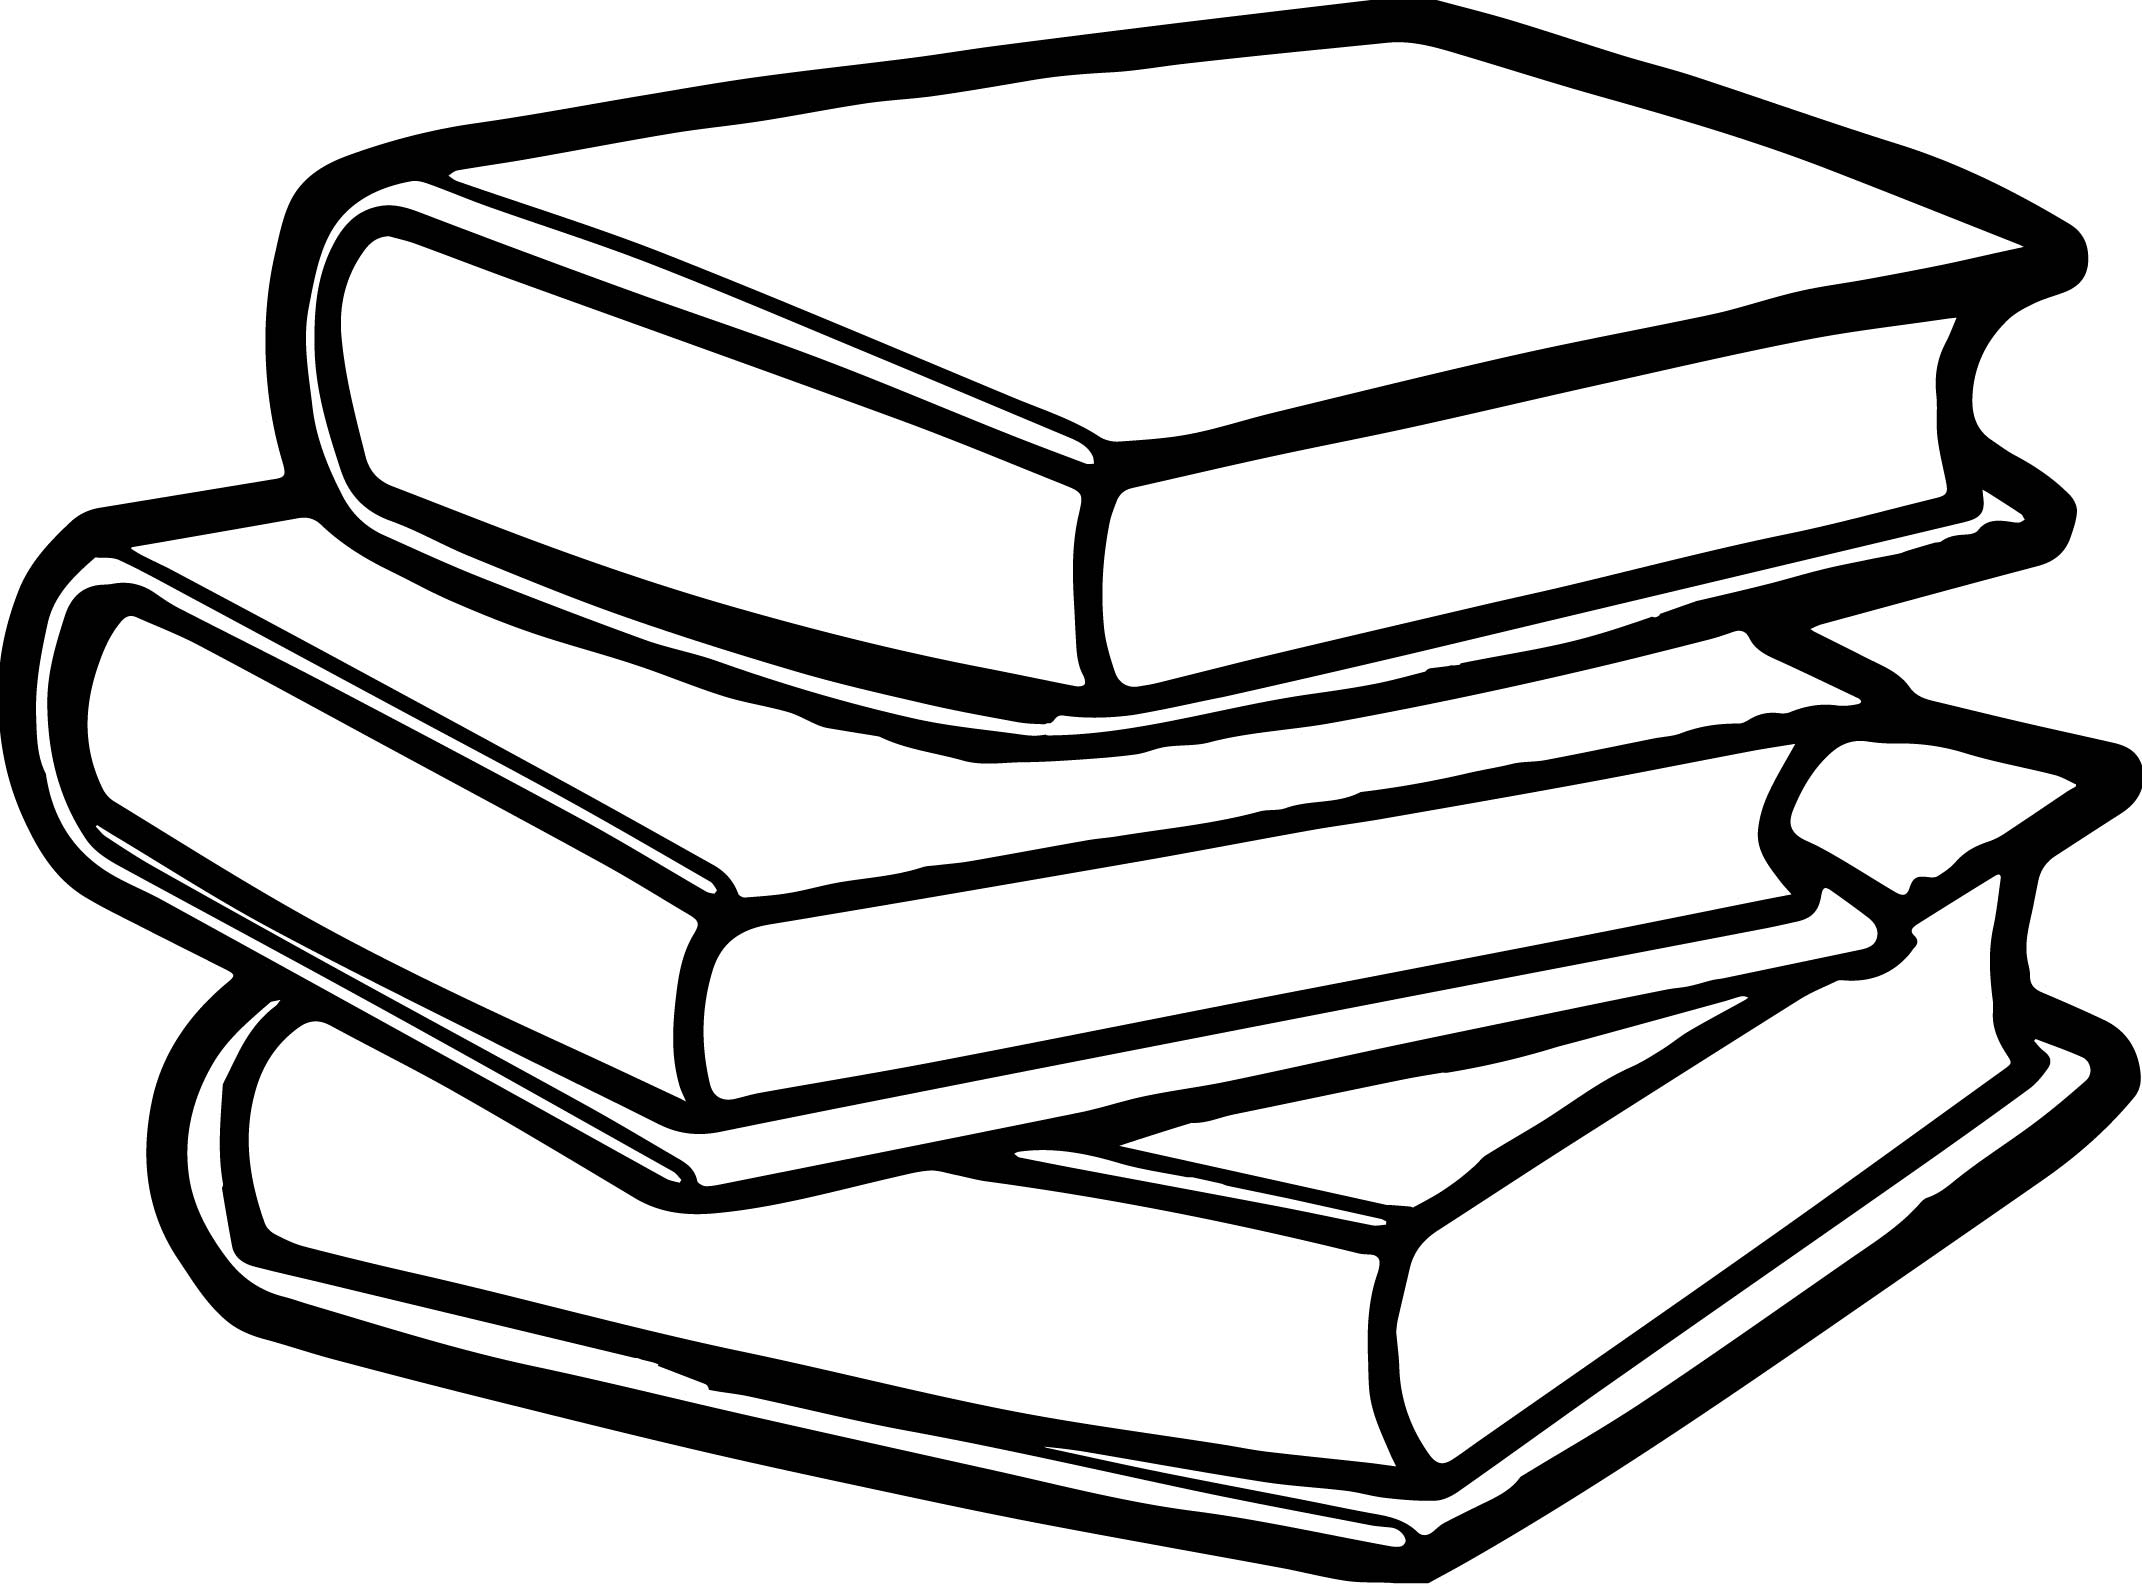 Download Books Coloring Pages - Best Coloring Pages For Kids